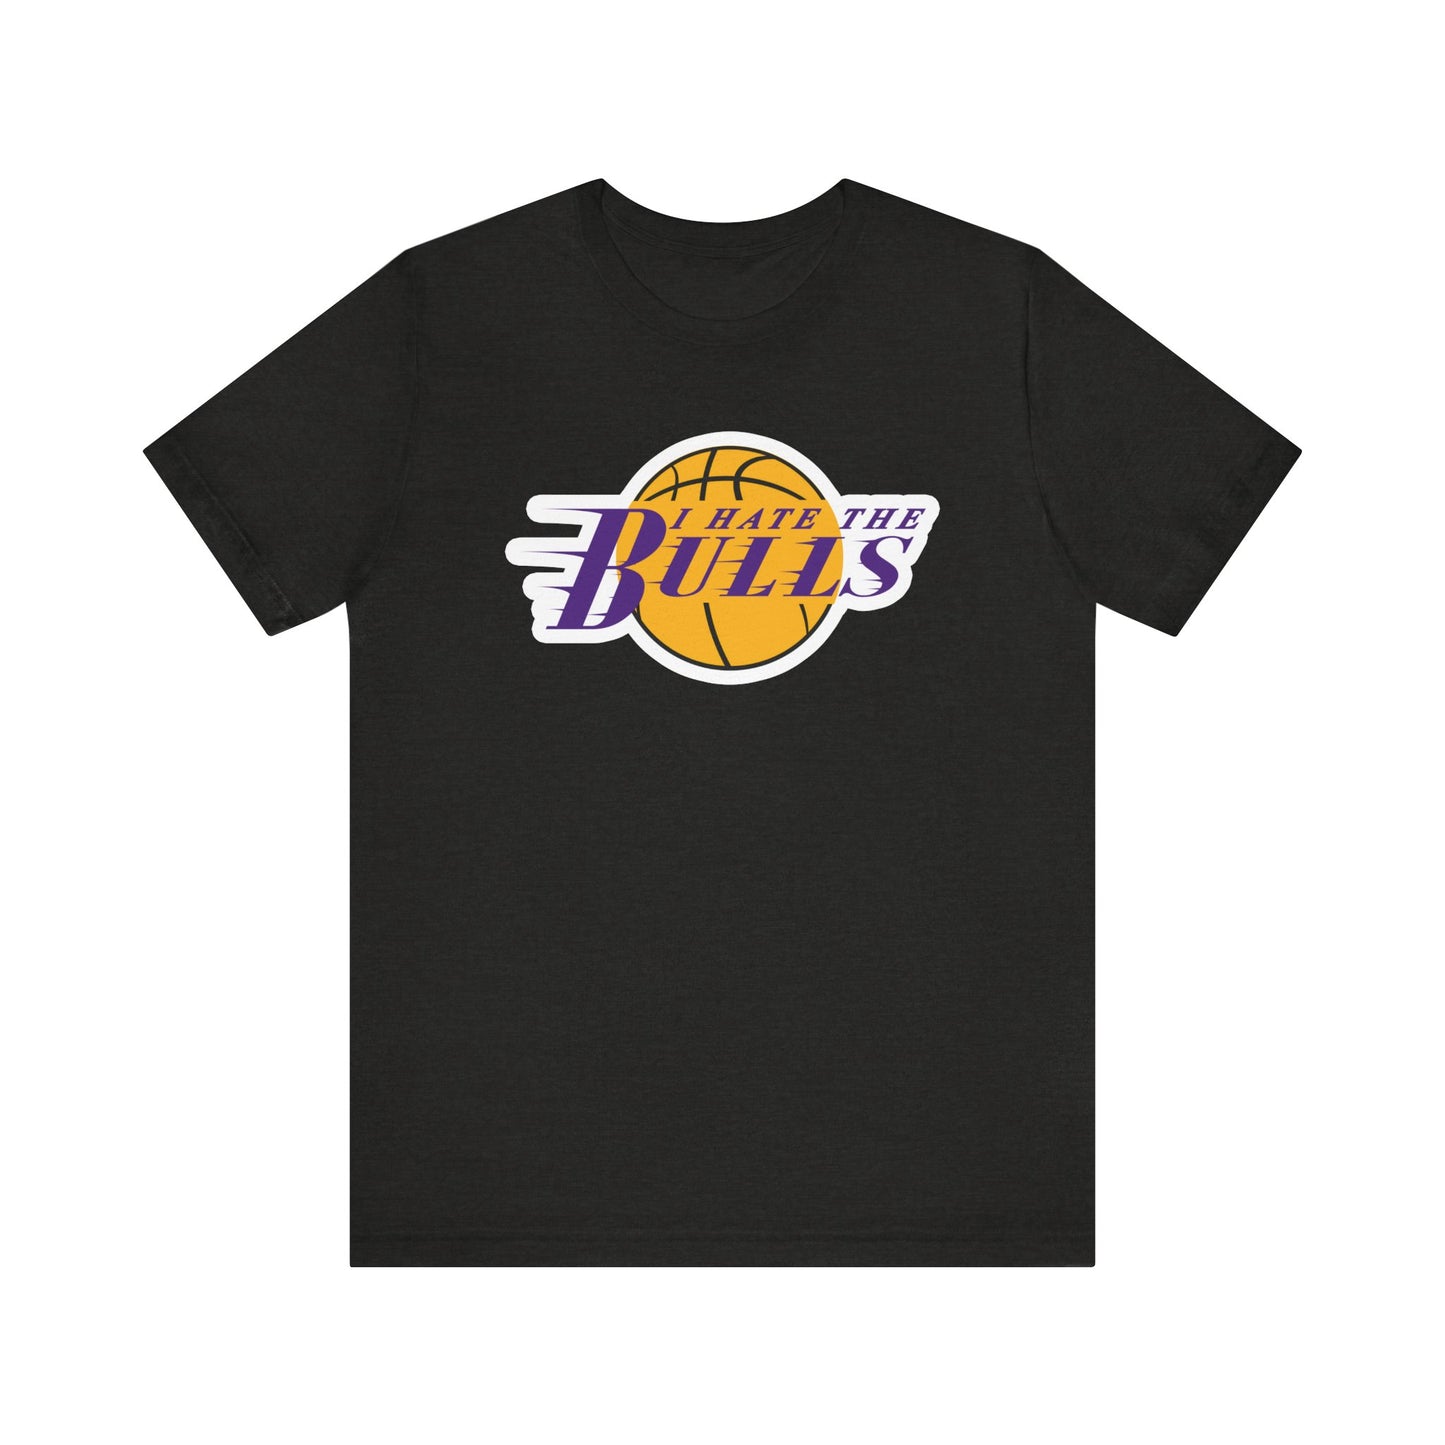 I Hate The Boohls (for Lake Show fans) - Unisex Jersey Short Sleeve Tee